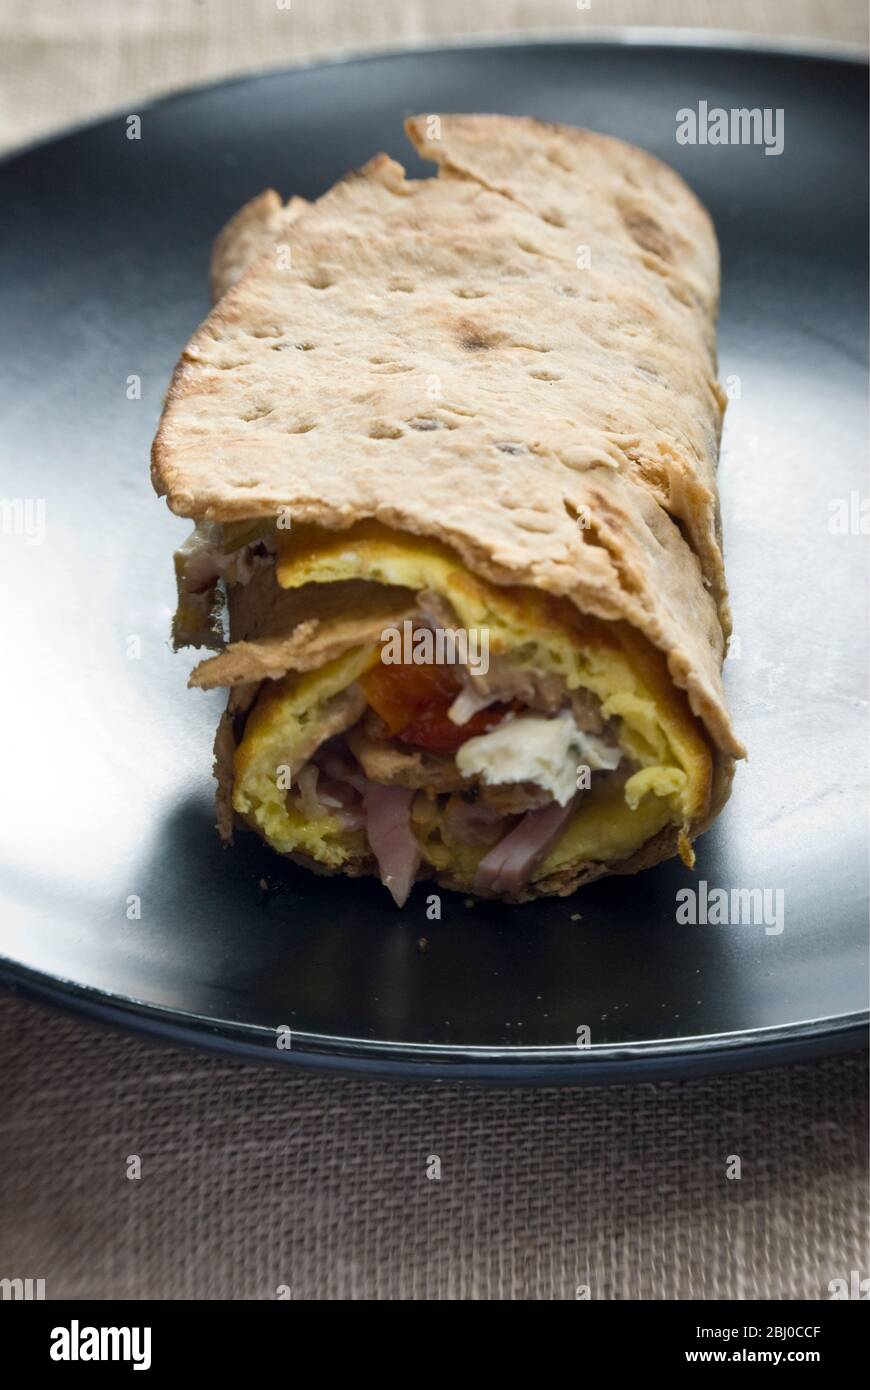 Thin pancake style omelette with mushroom, ham, sundried tomatoes, goat's cheese and parmesan on thin Swedish bread rolled up, as a portable breakfast Stock Photo